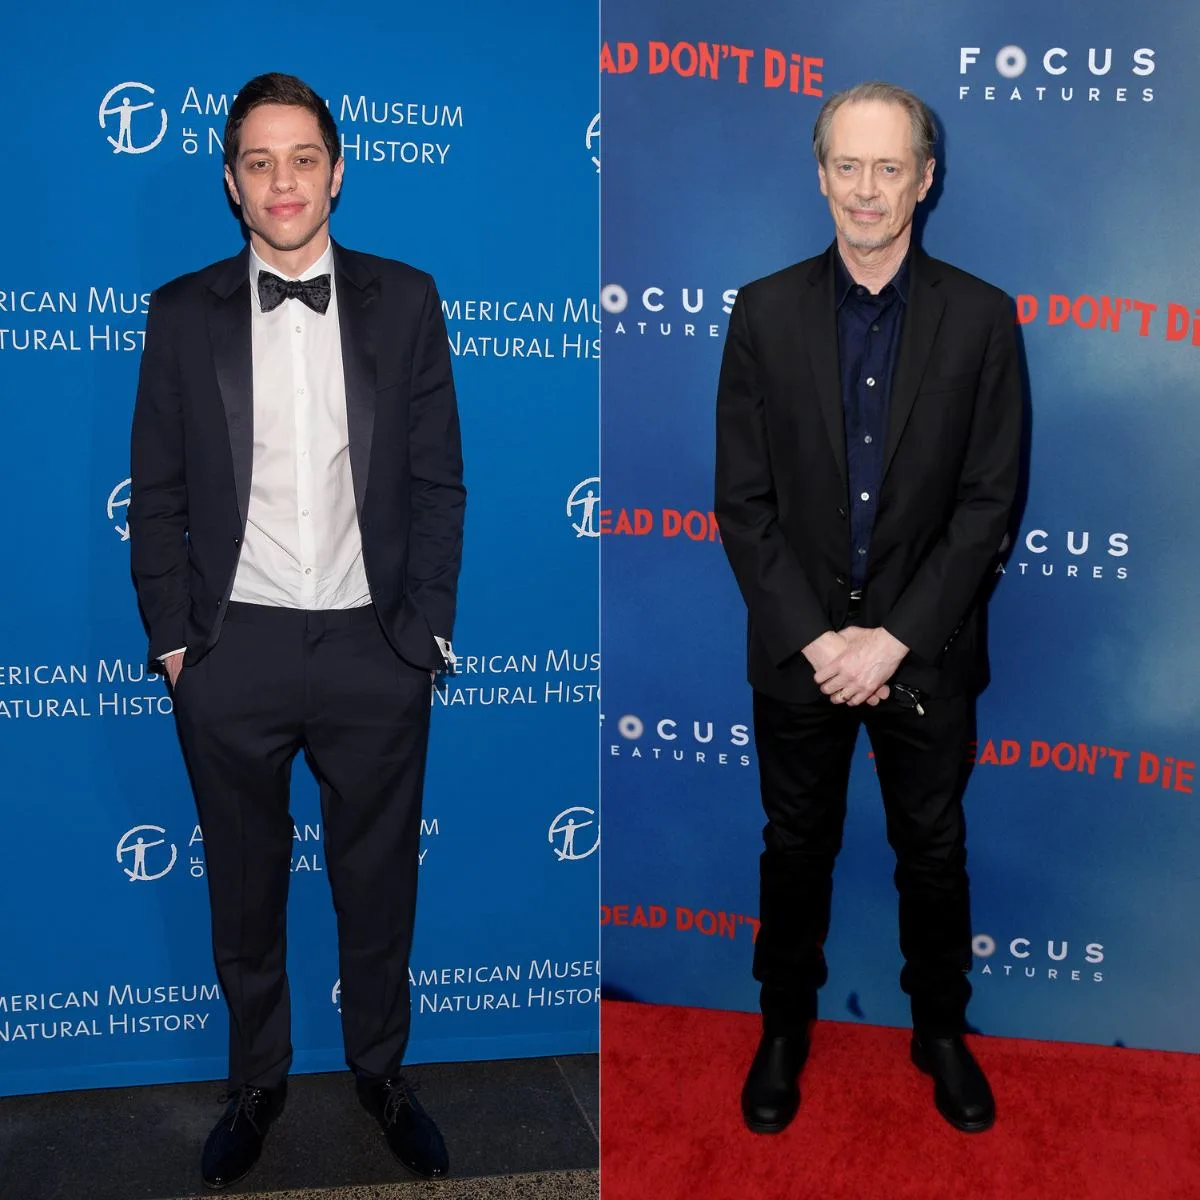 Is Pete Davidson related to Steve Buscemi